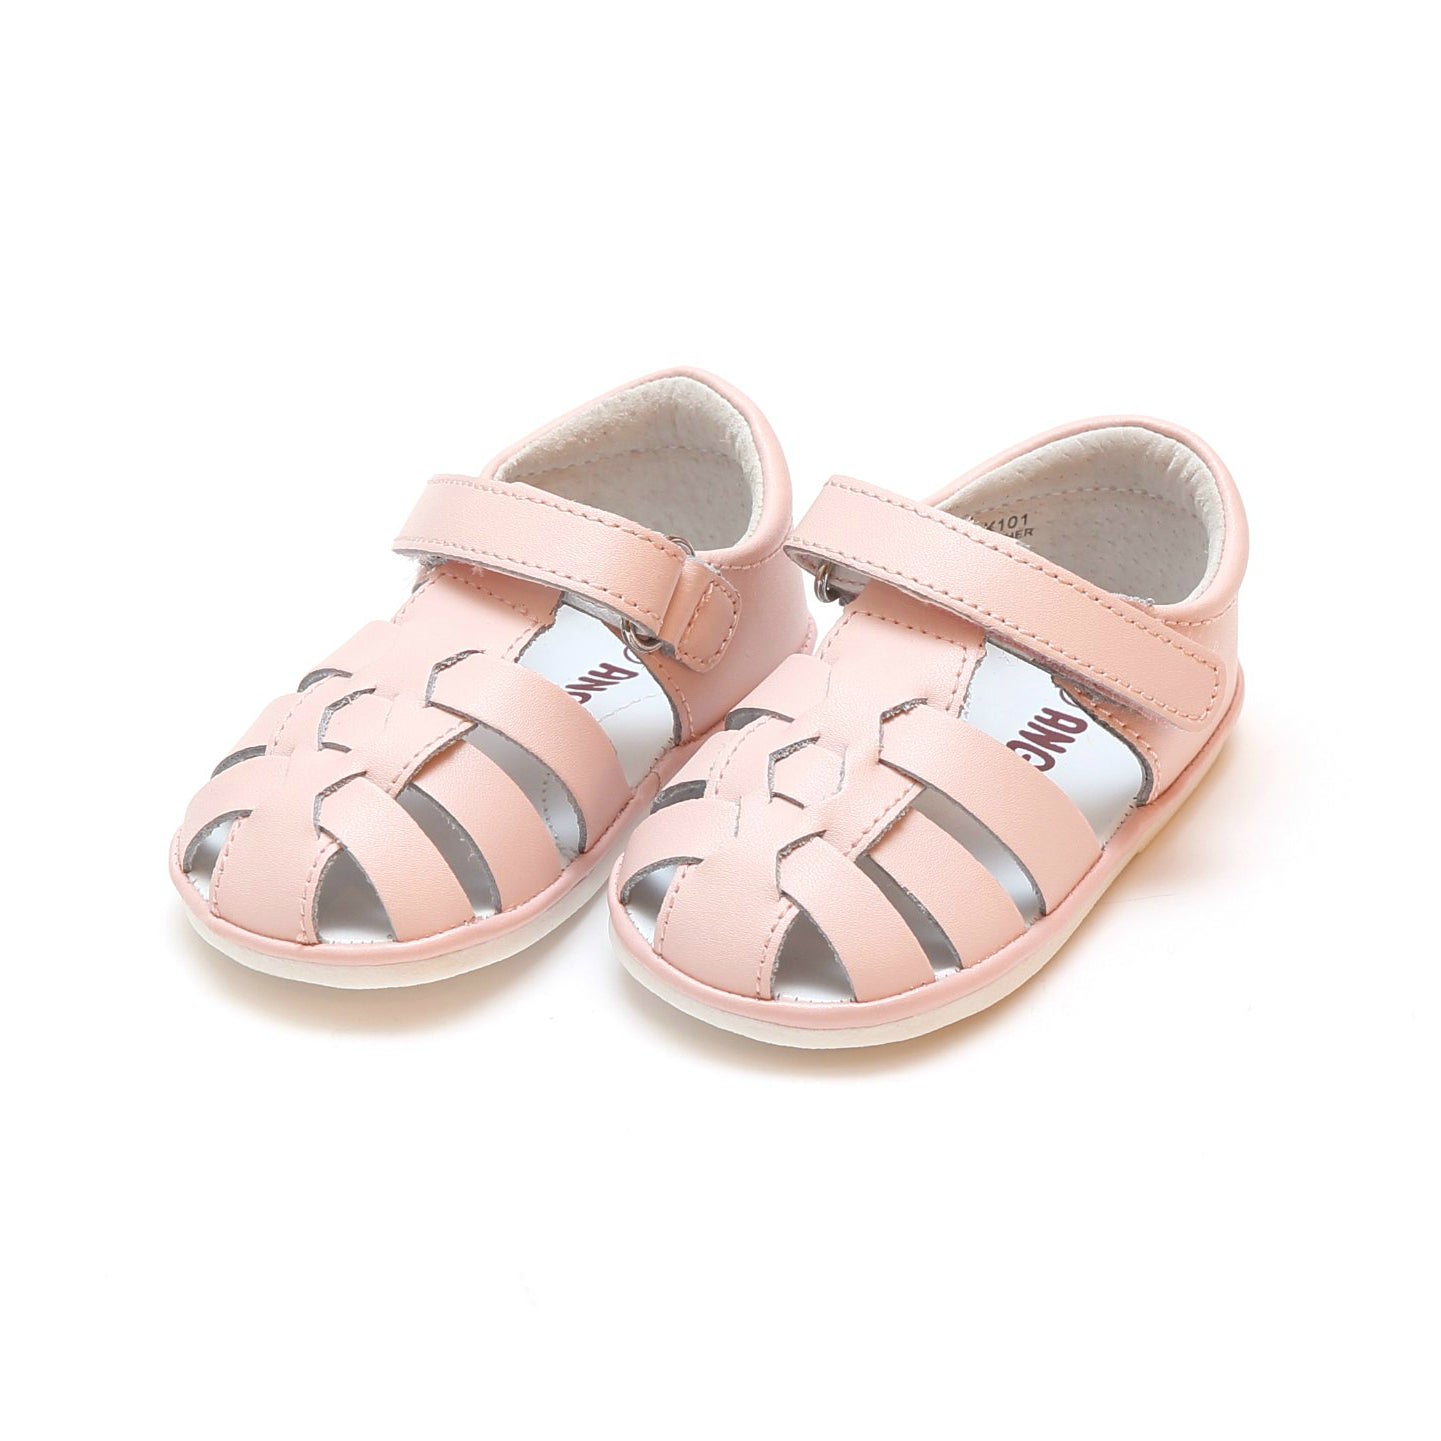 Christie Leather Fisherman Sandal - Babies & Toddlers